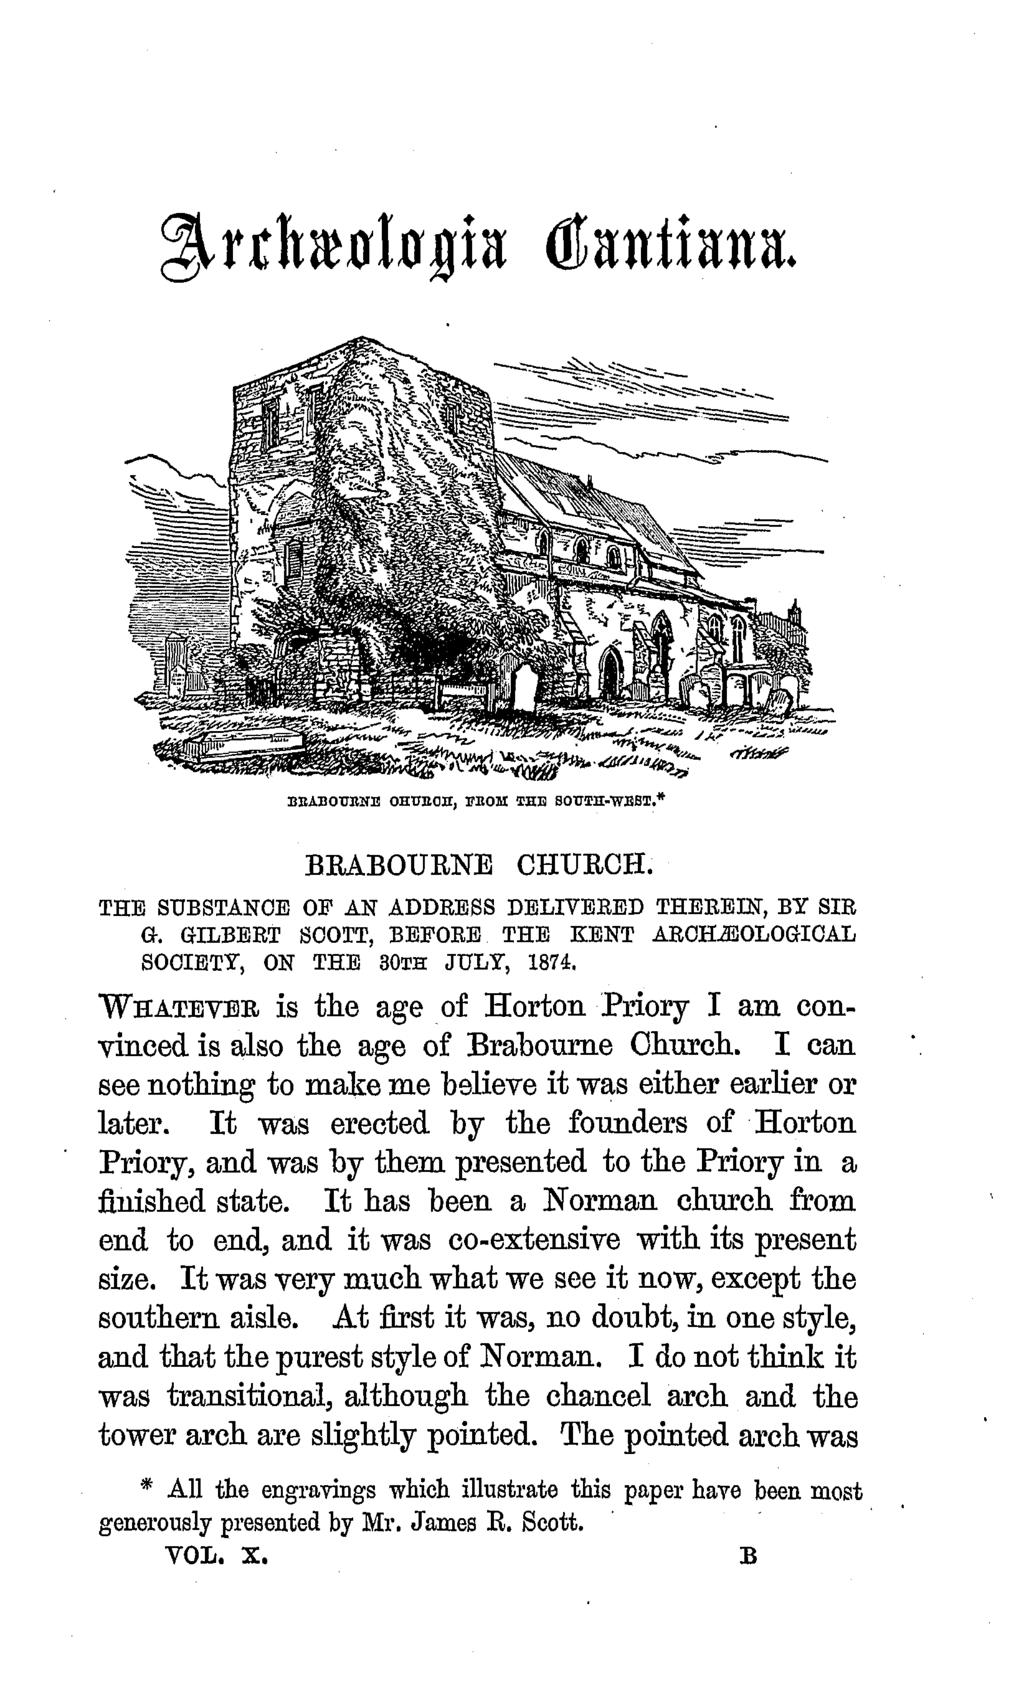 Archaeologia Cantiana Vol. 10 1876 BBABOUKSTE OHDBOH, BBOM IHE SOUTH-WEST.* BRABOURNE CHURCH. THE SUBSTANCE OF AN ADDRESS DELIVERED THEREIN, BY SIR a.